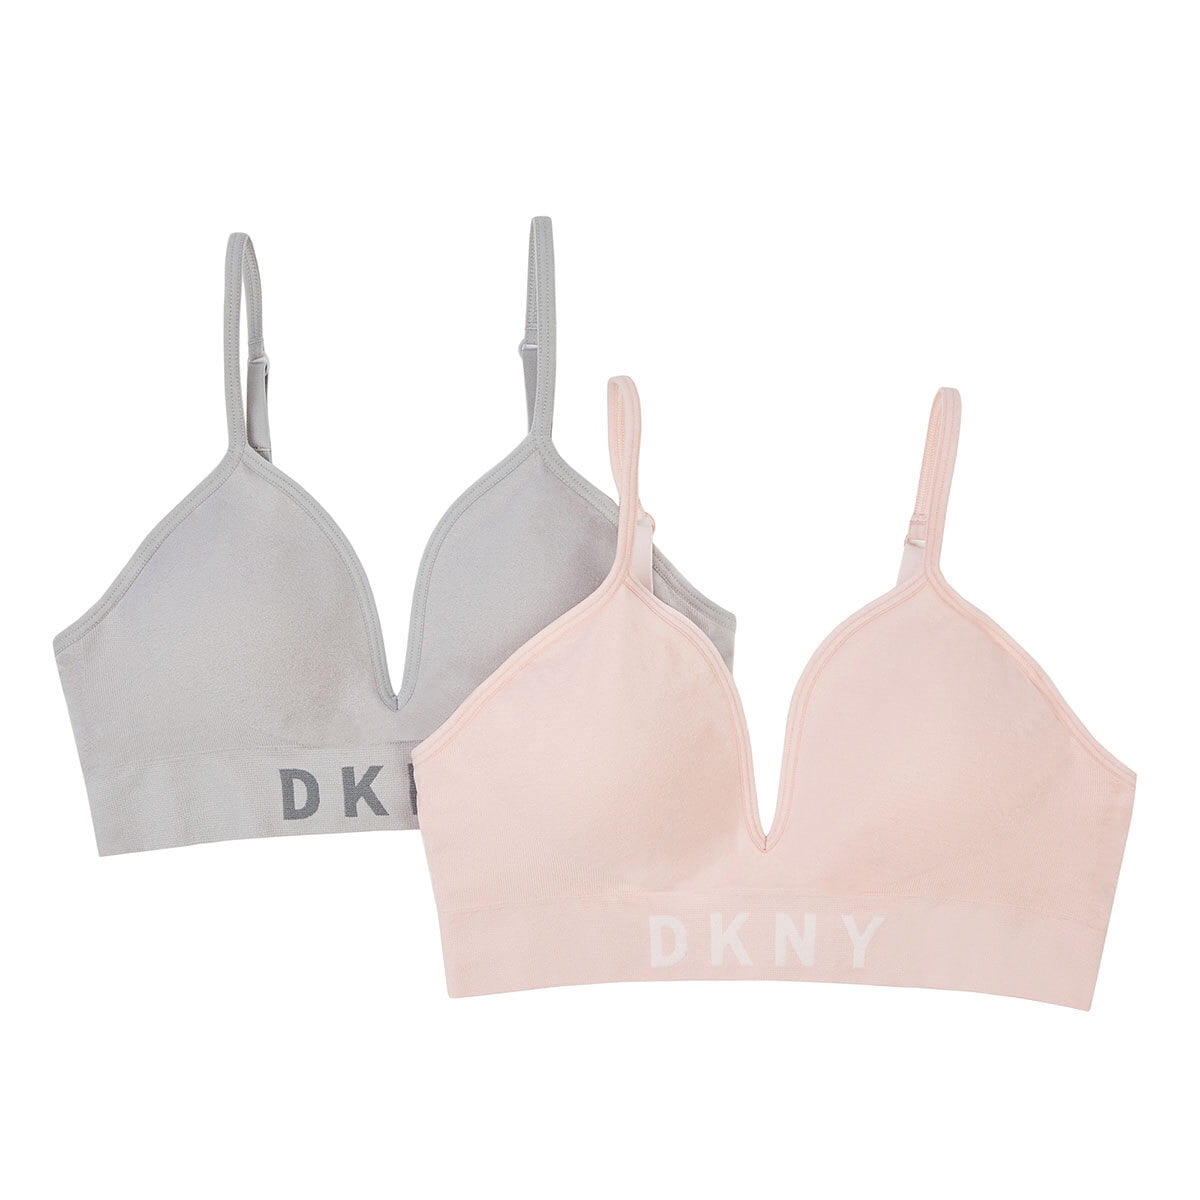 DKNY Women's Seamless Bralette, 2 Pack, (Pink/Grey, Small